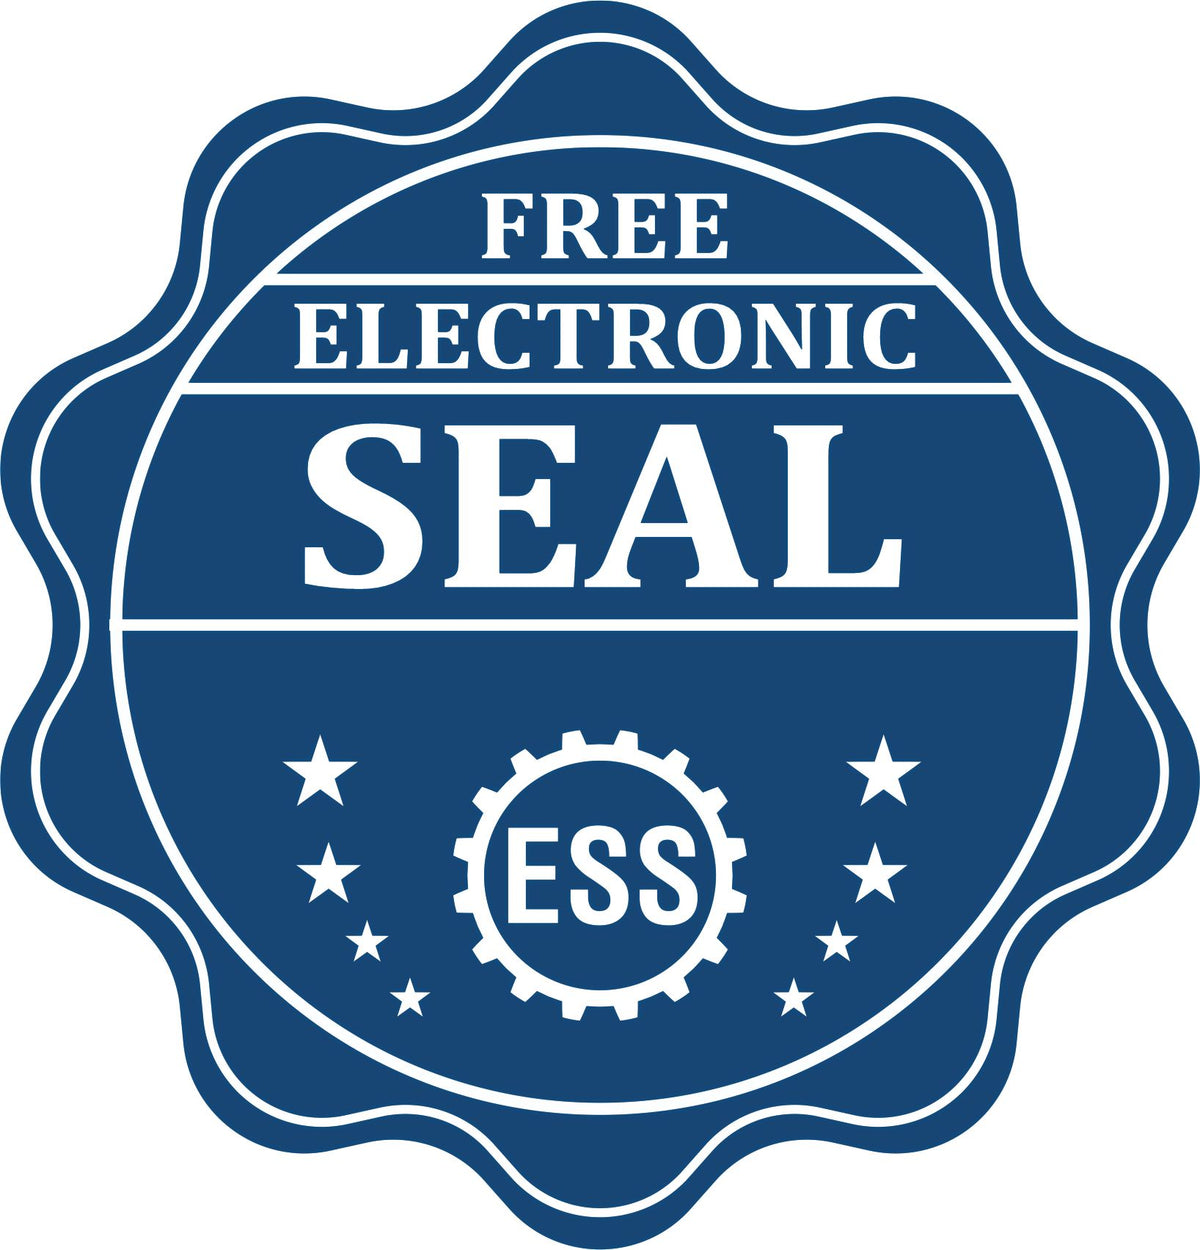 A badge showing a free electronic seal for the Slim Pre-Inked Rectangular Notary Stamp for Puerto Rico with stars and the ESS gear on the emblem.